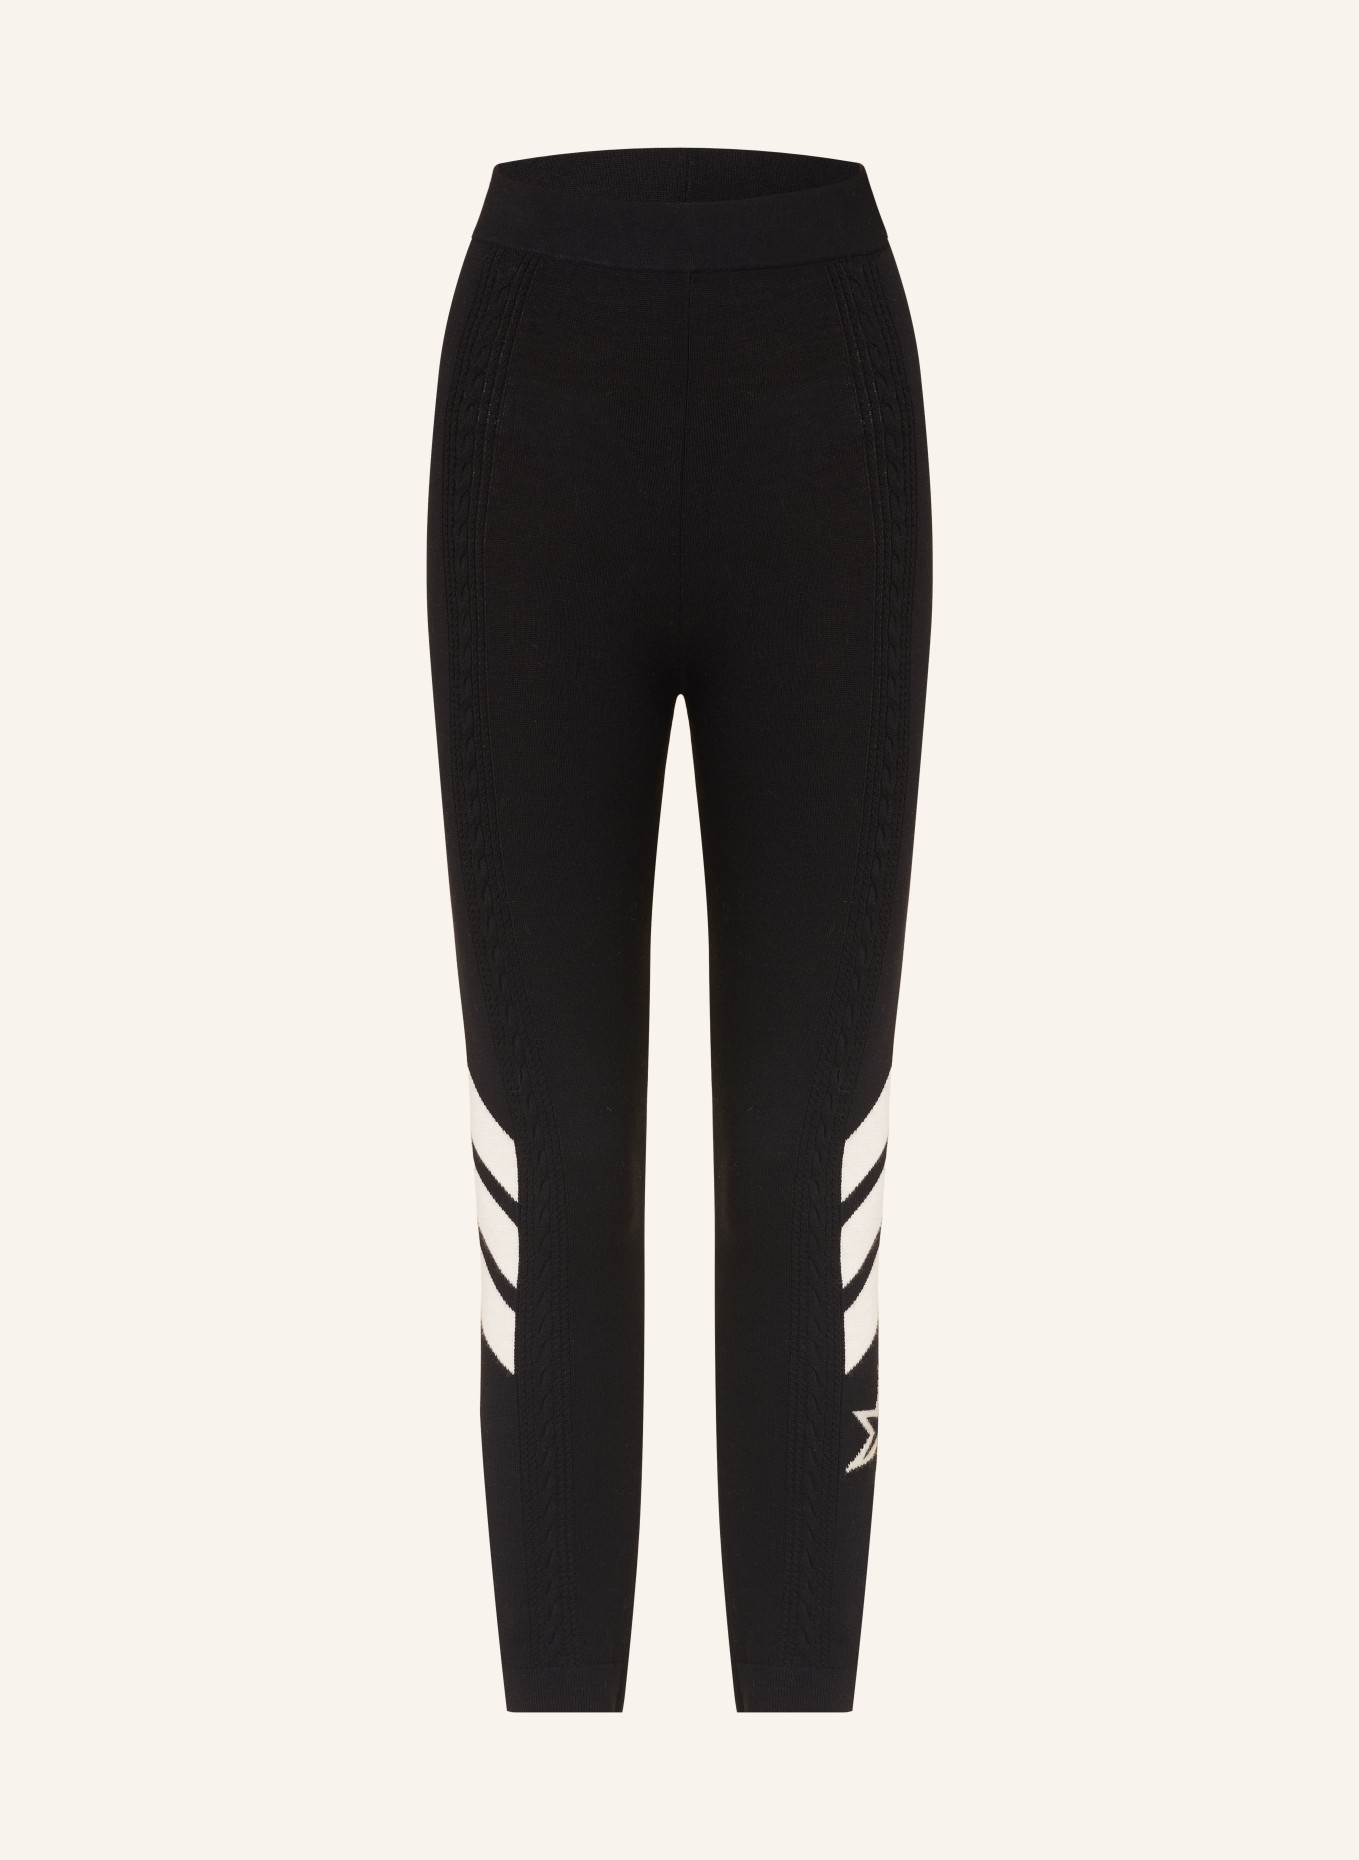 PERFECT MOMENT Knit leggings CABLE made of merino wool, Color: BLACK (Image 1)